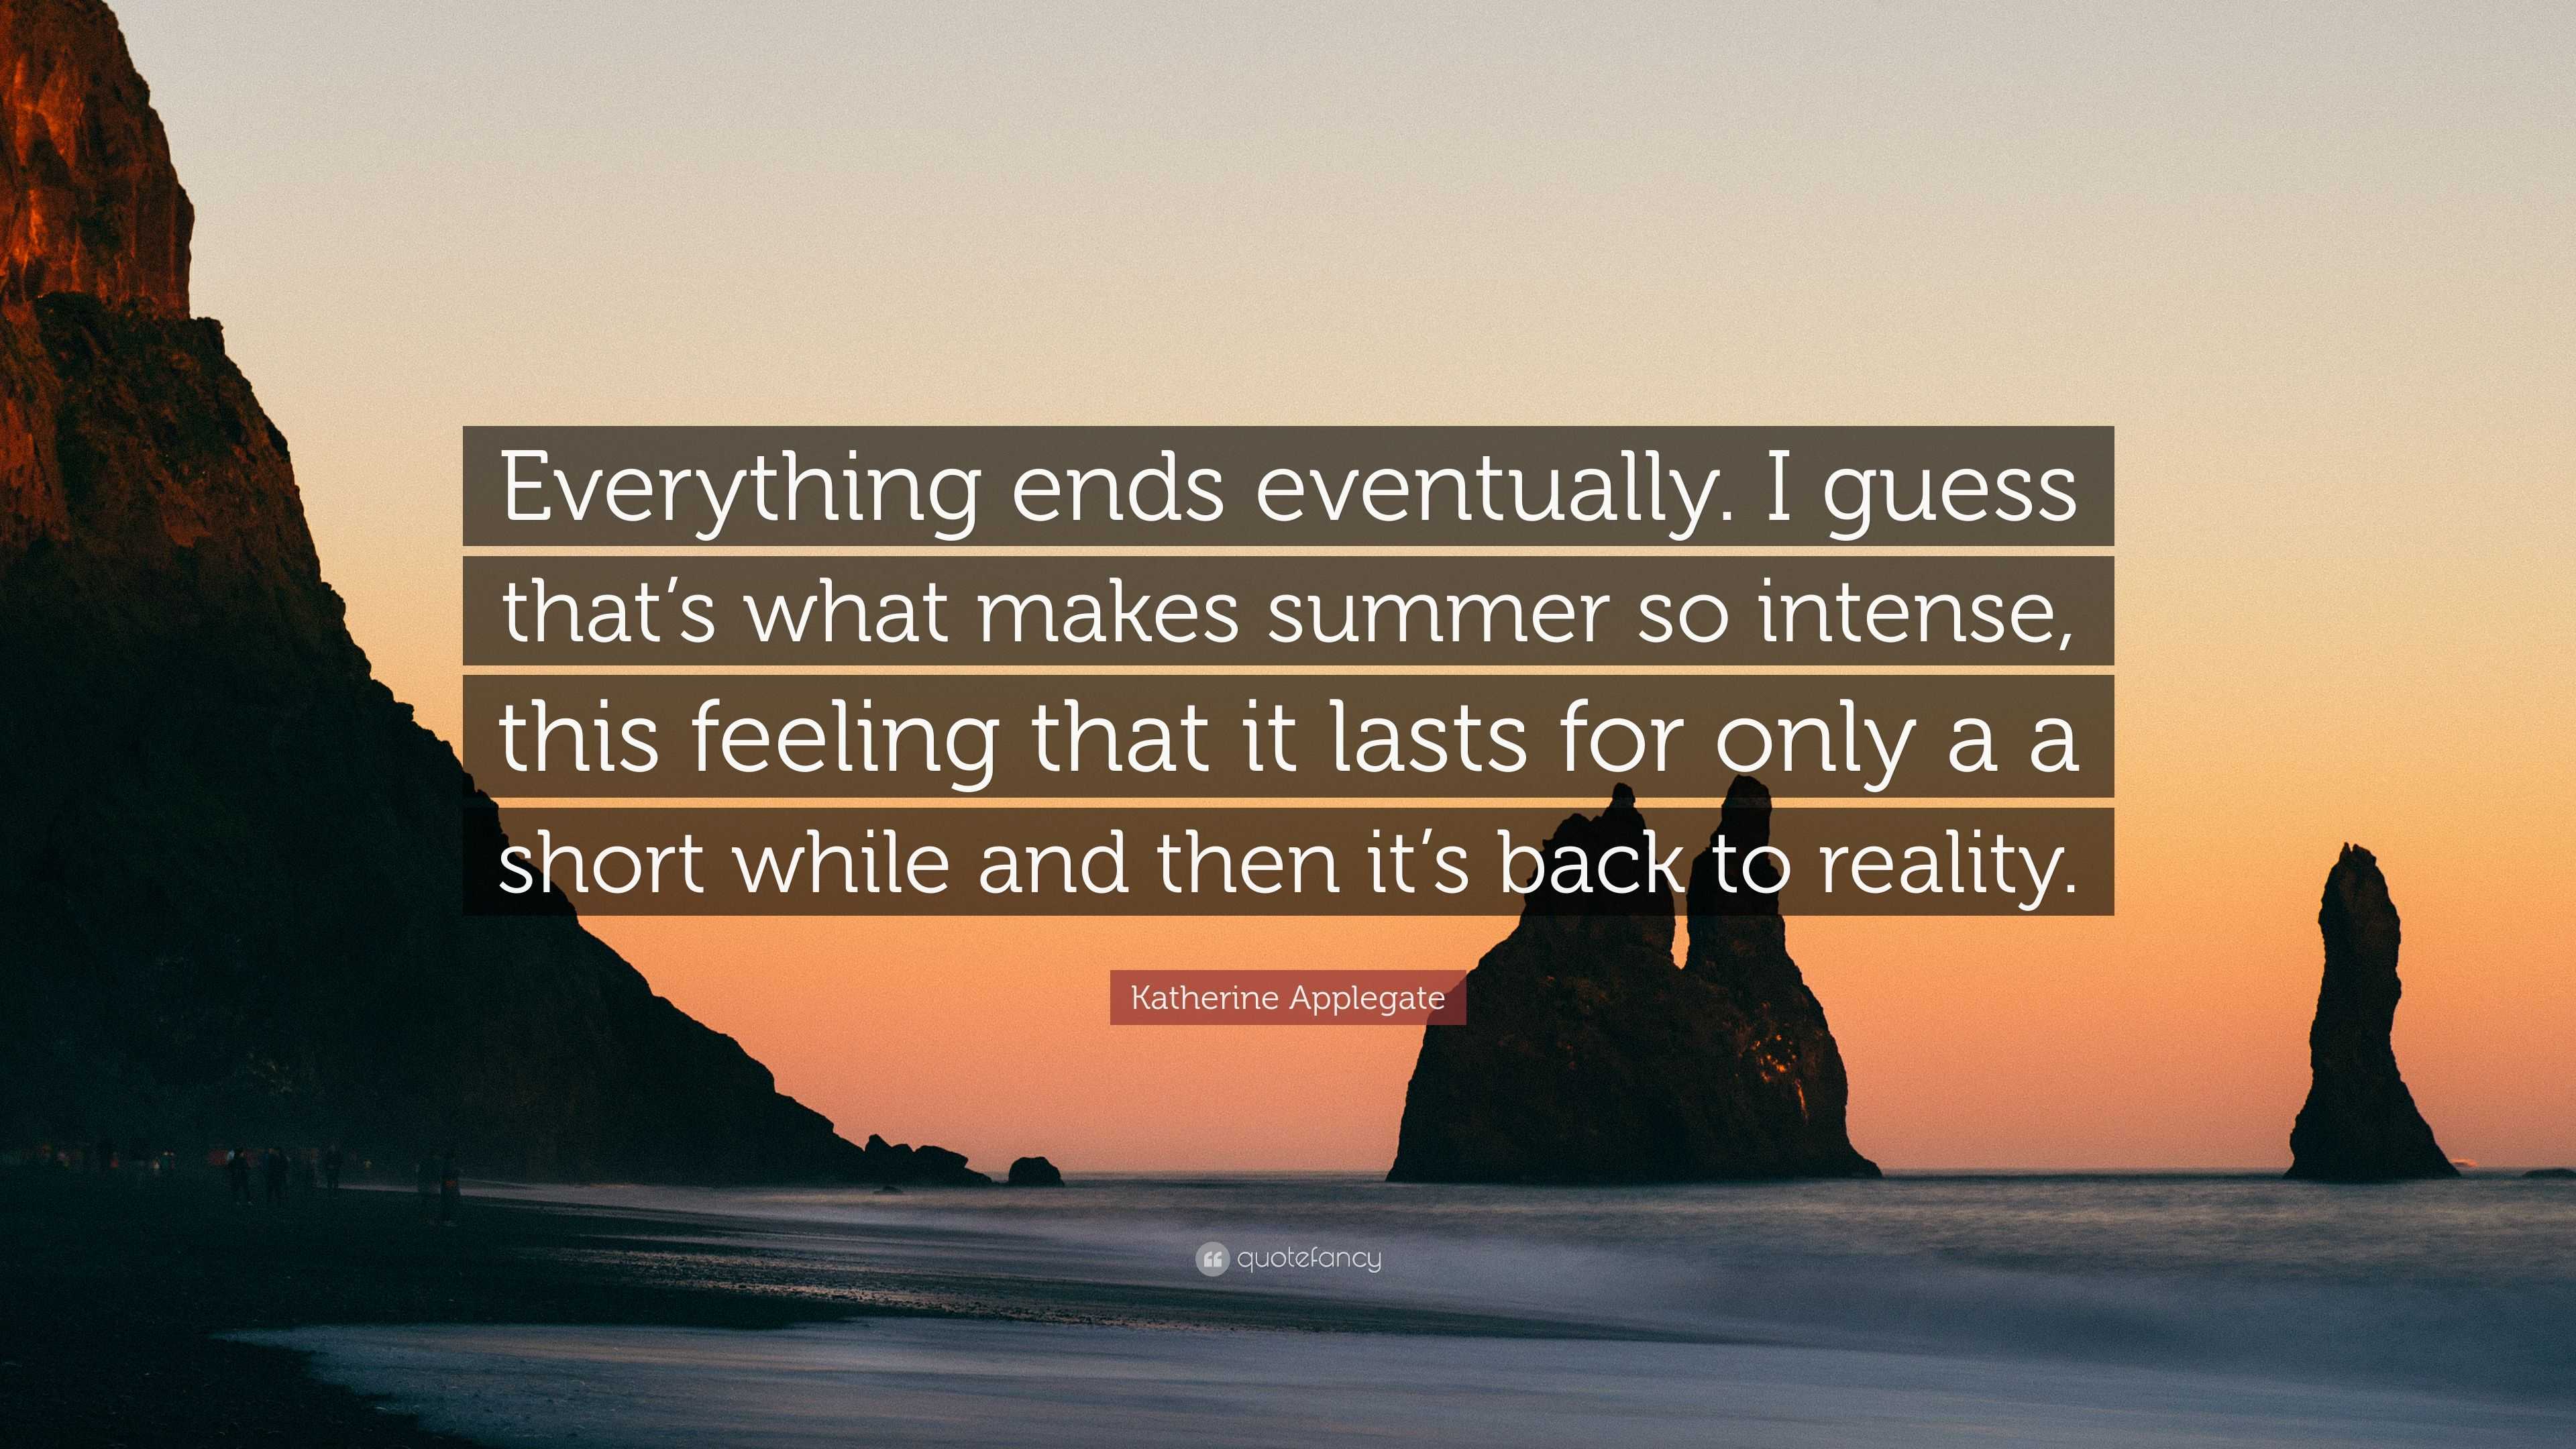 Katherine Applegate Quote: “Everything ends eventually. I guess that's what makes summer so intense, this feeling it lasts for only a